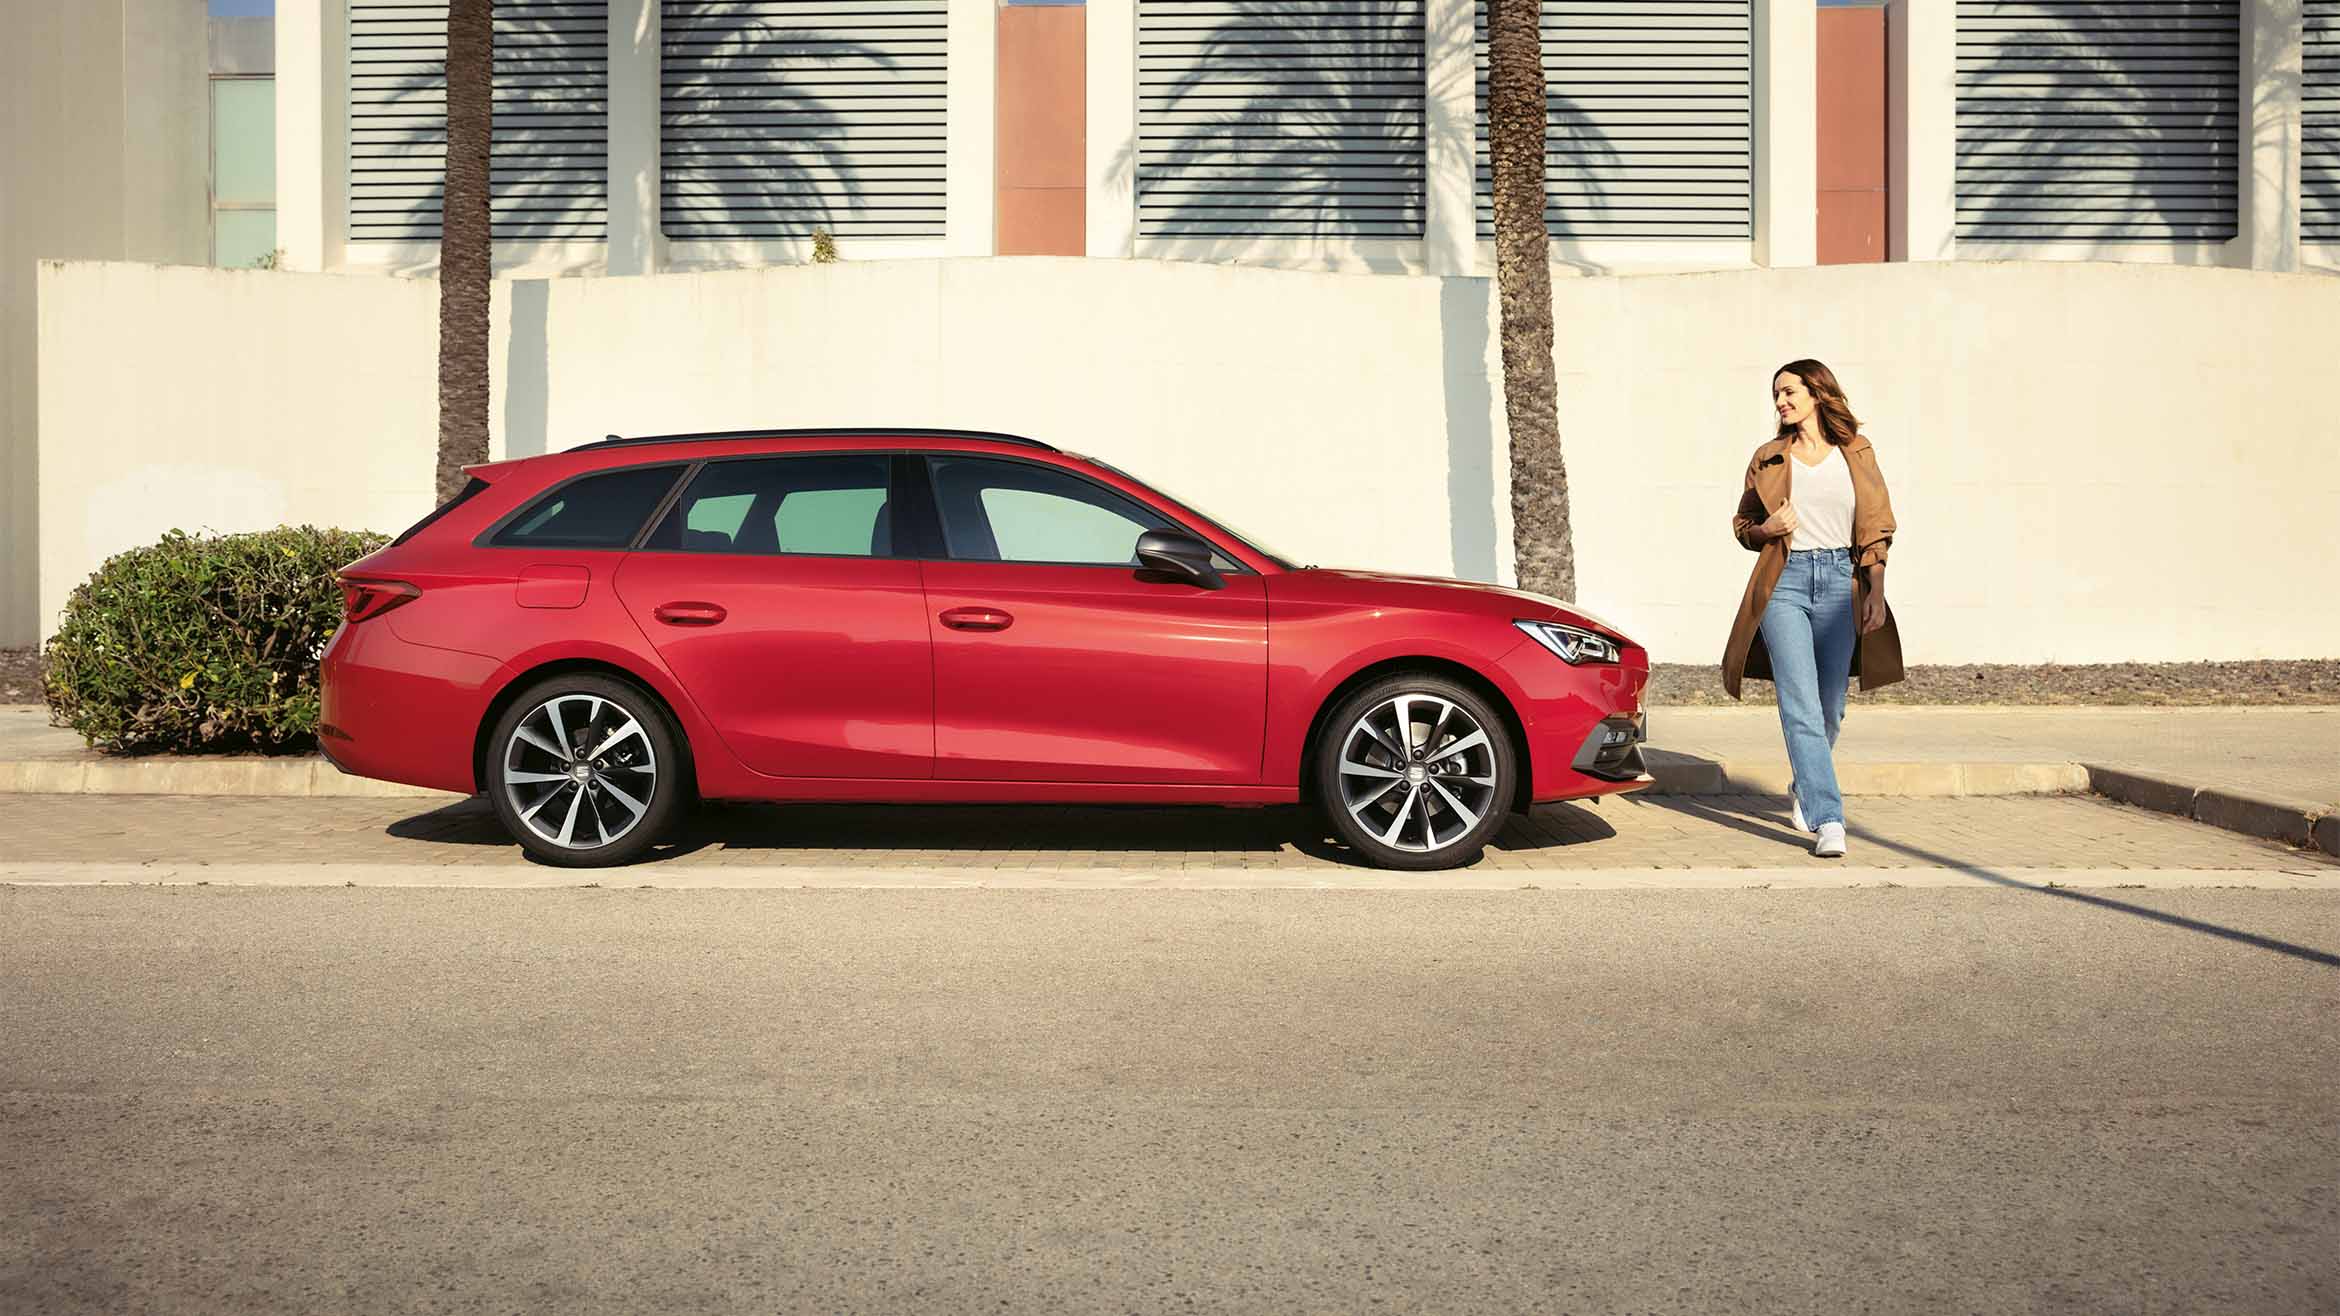 A red SEAT Leon SP Heather OW parked in a scenic outdoor location. The car features a spacious interior, sleek design, LED headlights and alloy wheels, ideal for families and long journeys.